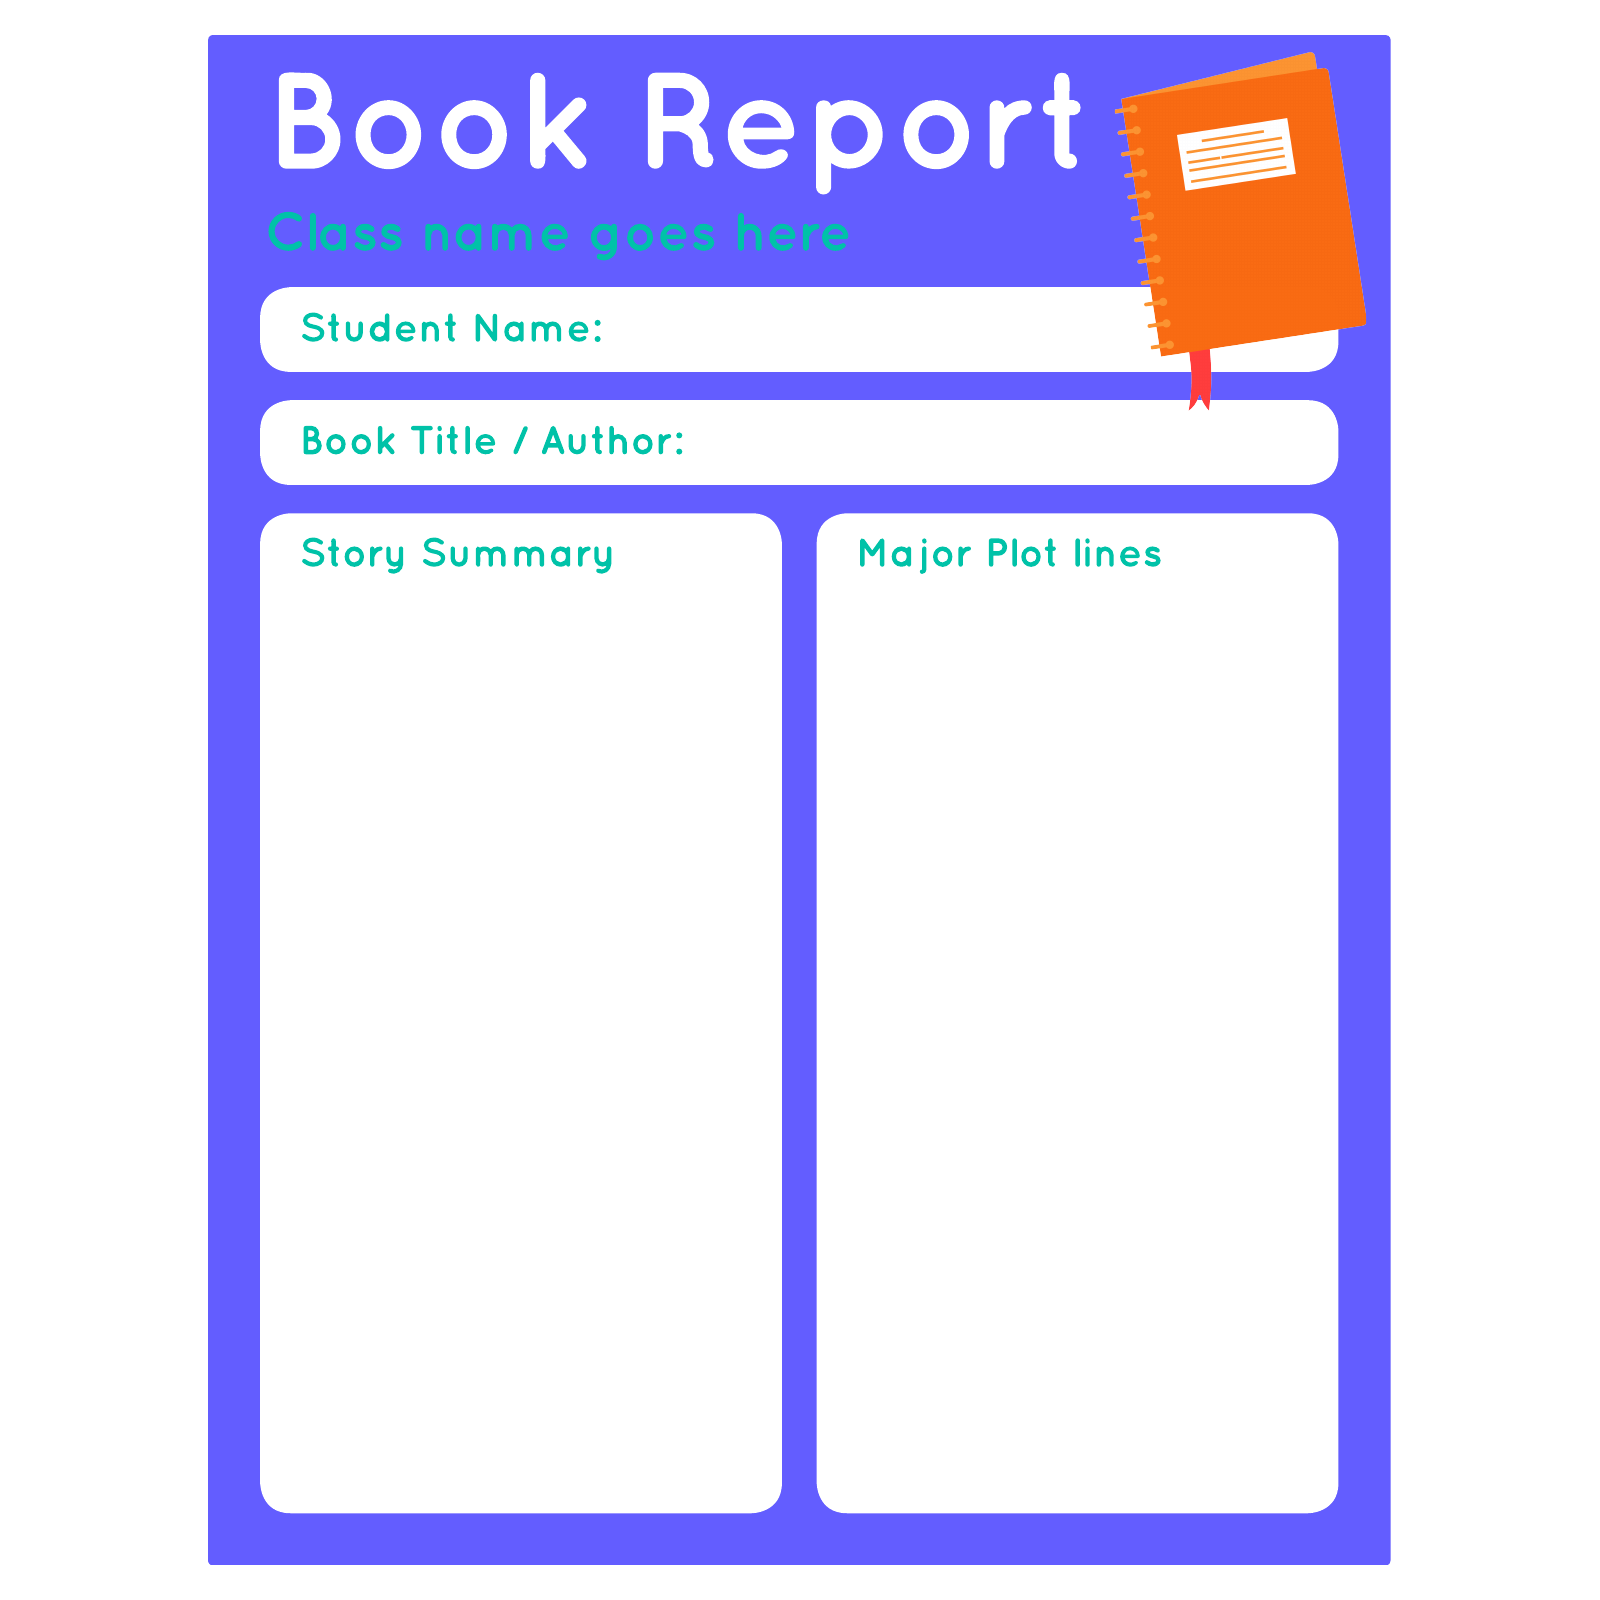 Book report example